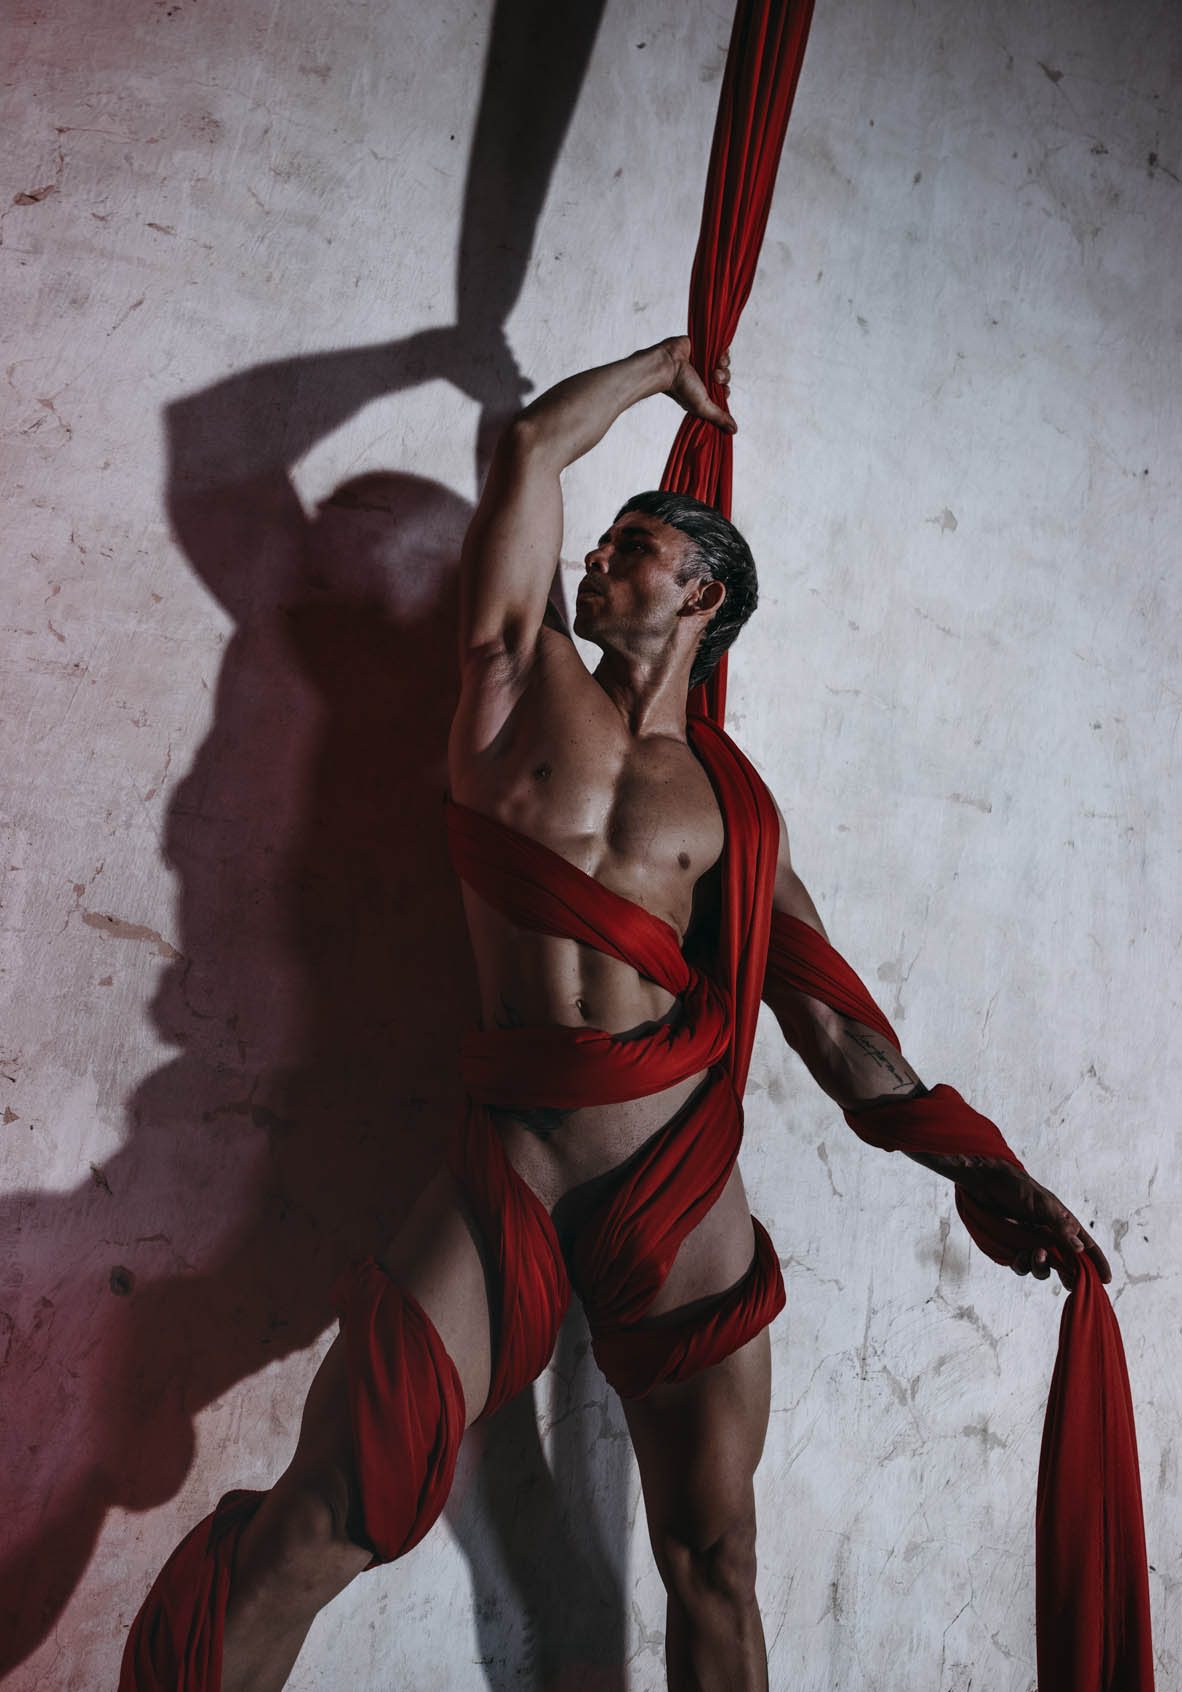 – NSFW – «BOUND BY PAIN, FREED BY LOVE» – Marvin Pleitez by Erick Monterrosa